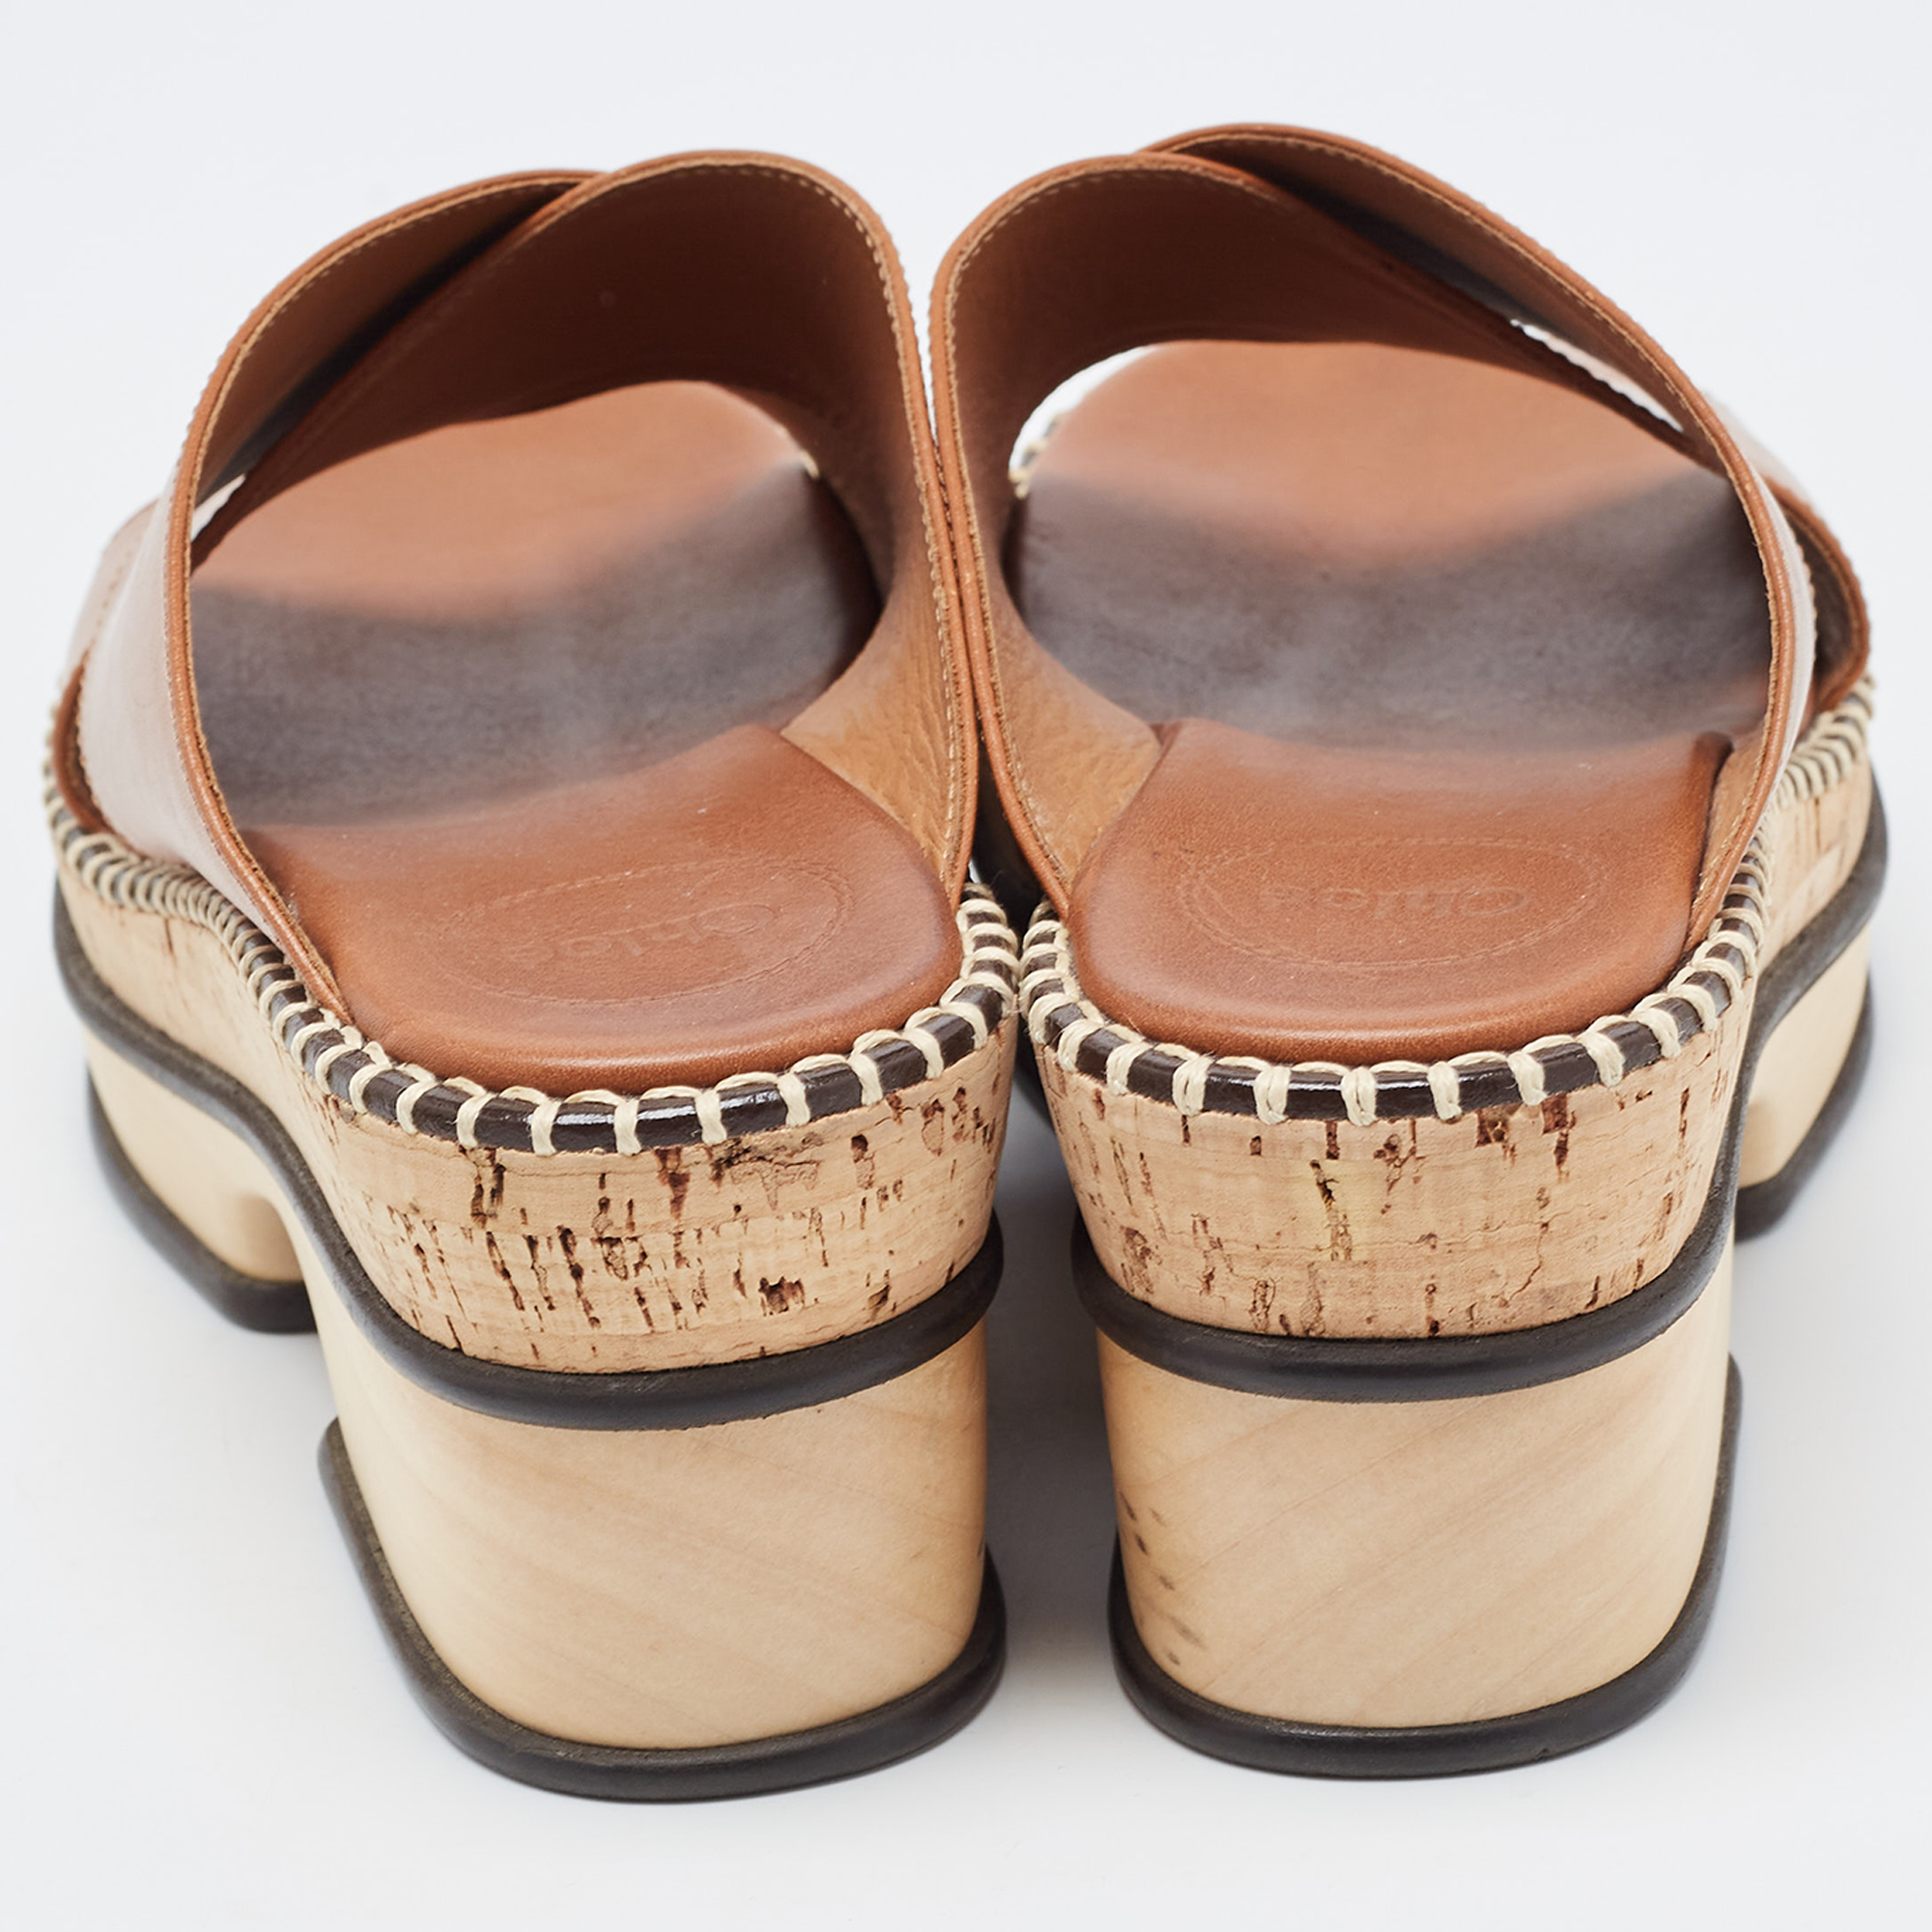 Chloe Brown Leather Woody Leather Slides Sandals Size 37